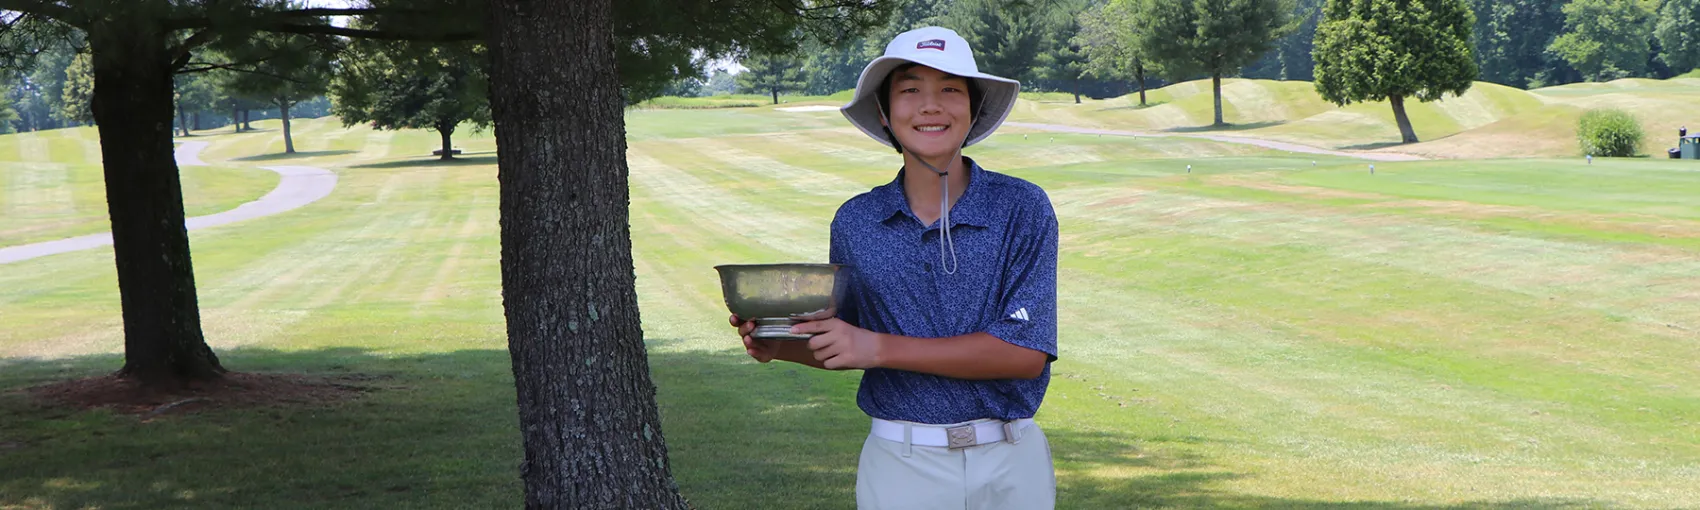 Feng Claims Second W.Y. Dear Boys Championship; Wins 54th Edition